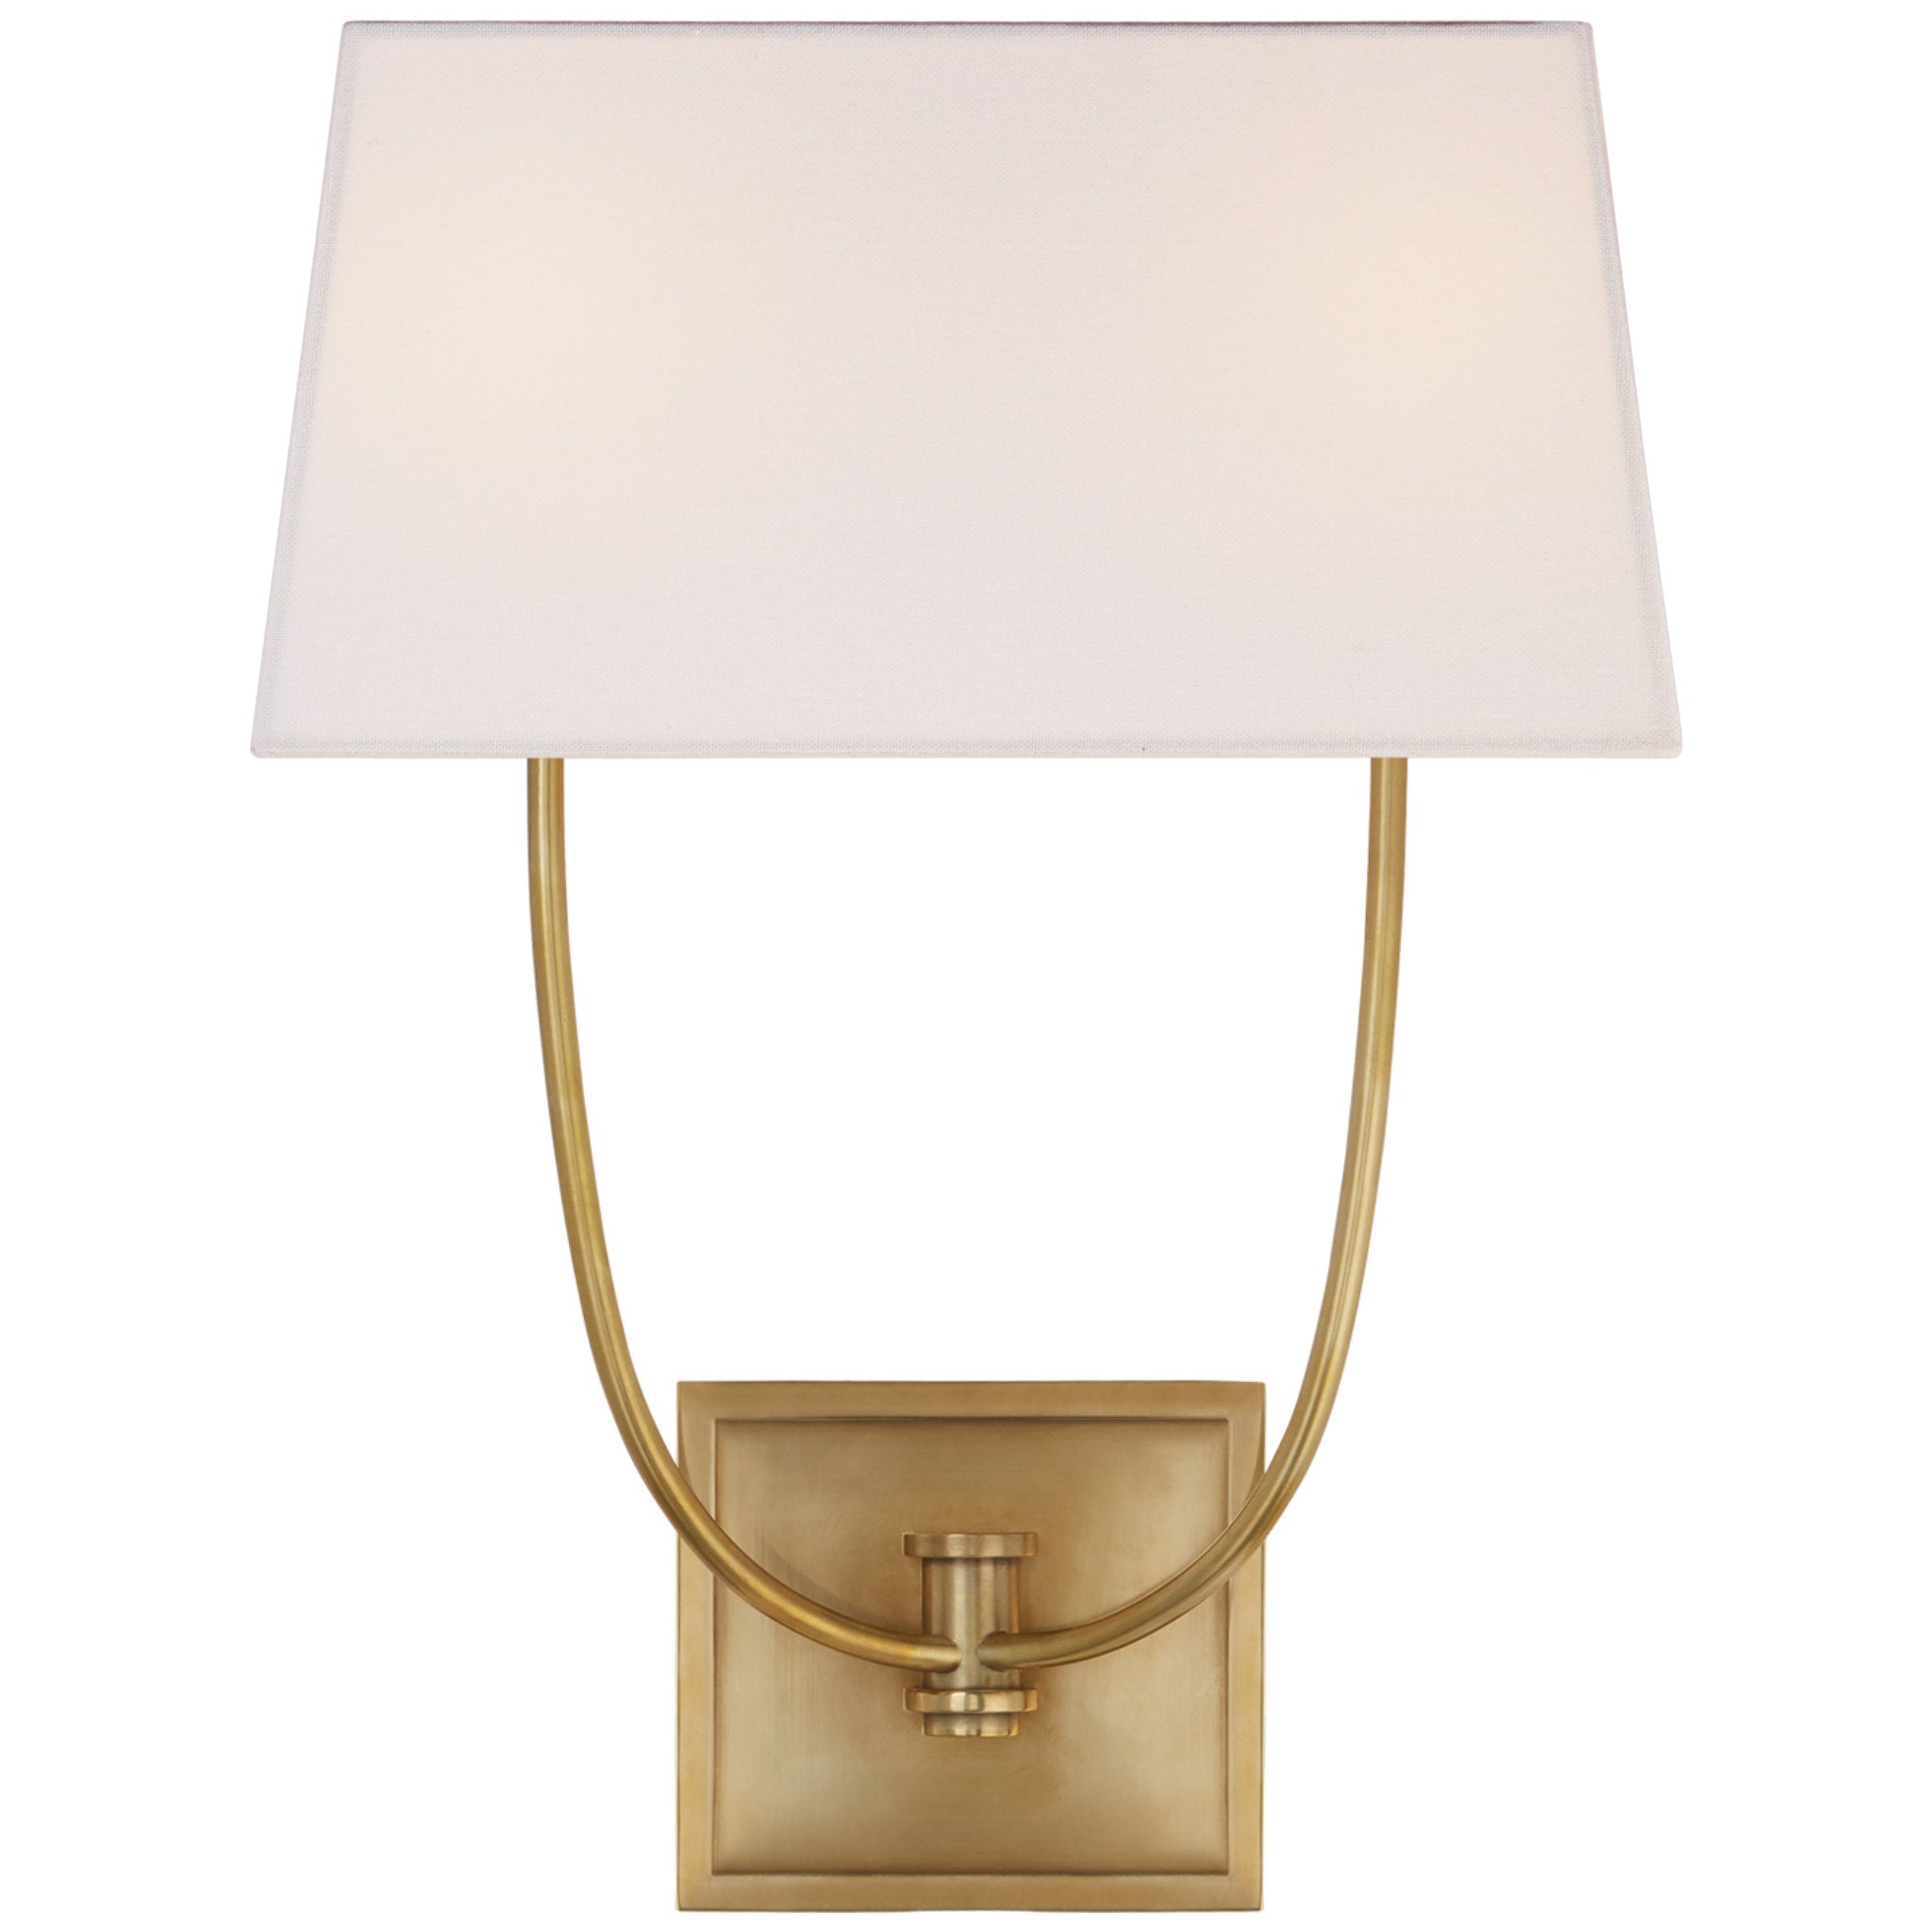 Chapman & Myers Venini Double Sconce in Antique-Burnished Brass with Linen Shade